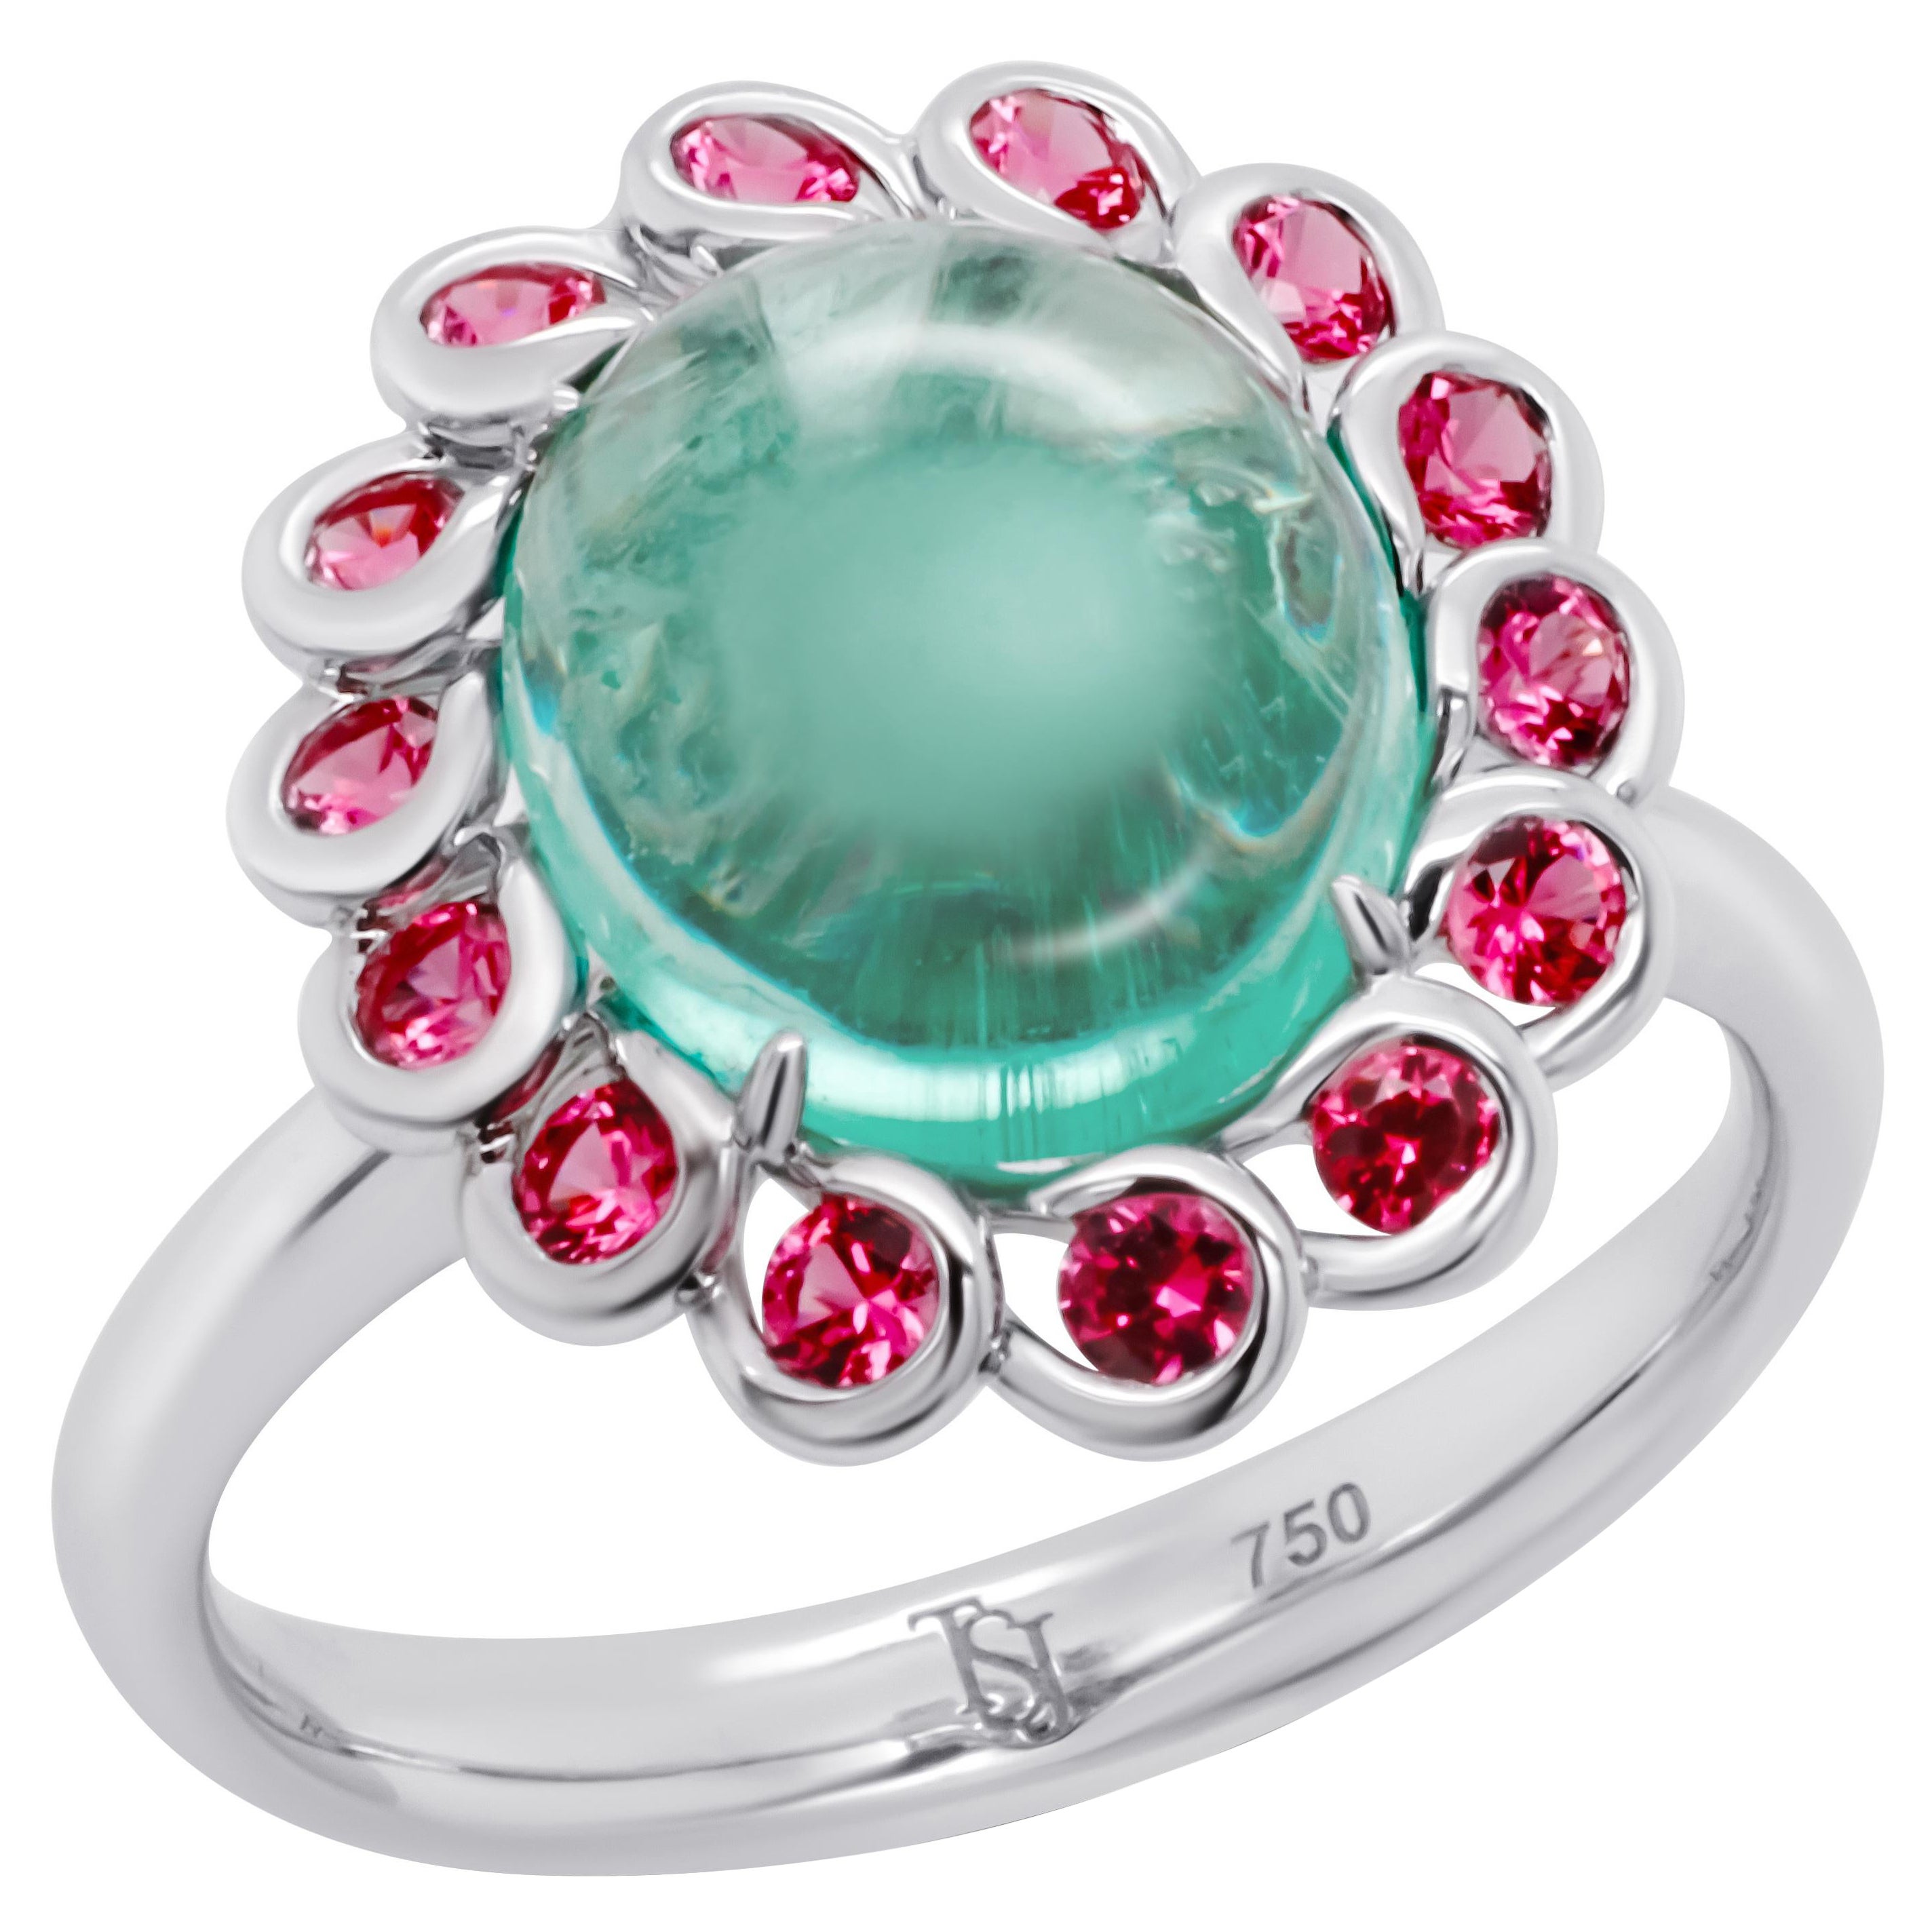 3.74 Ct Russian Emerald Cabochon and Spinel 18K Gold Ring For Sale